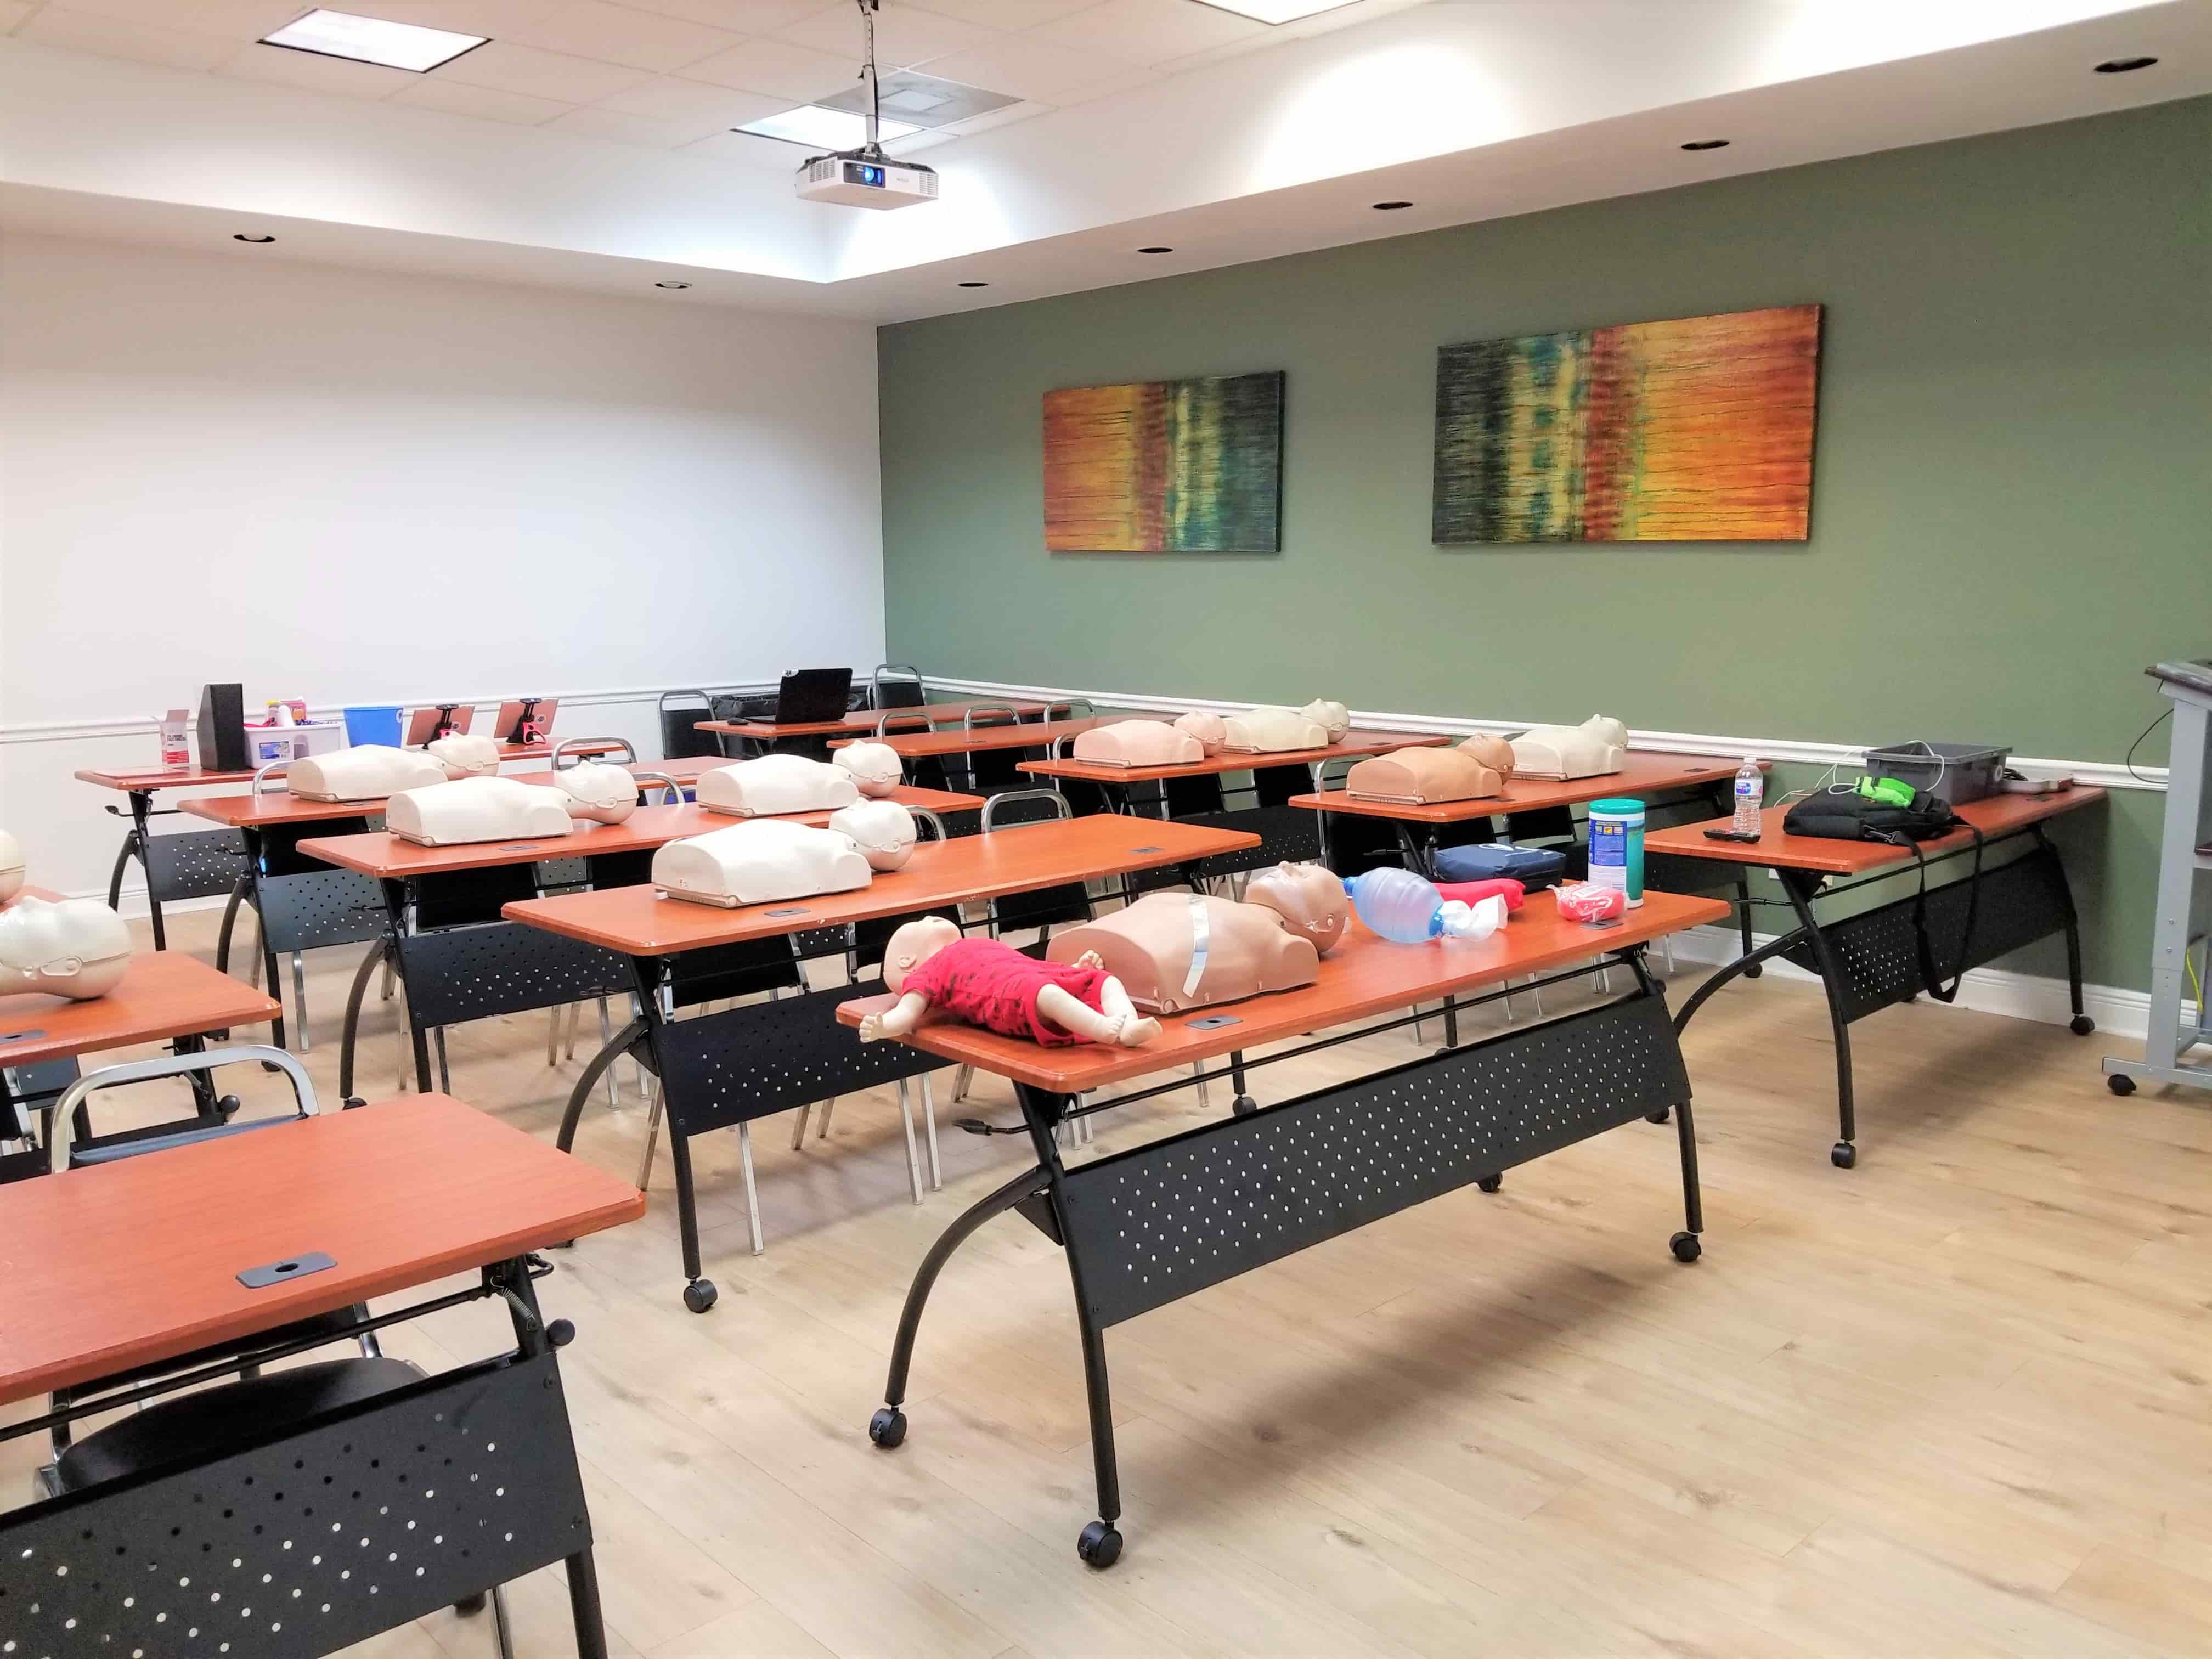 Jupiter cpr bls first aid certification classes